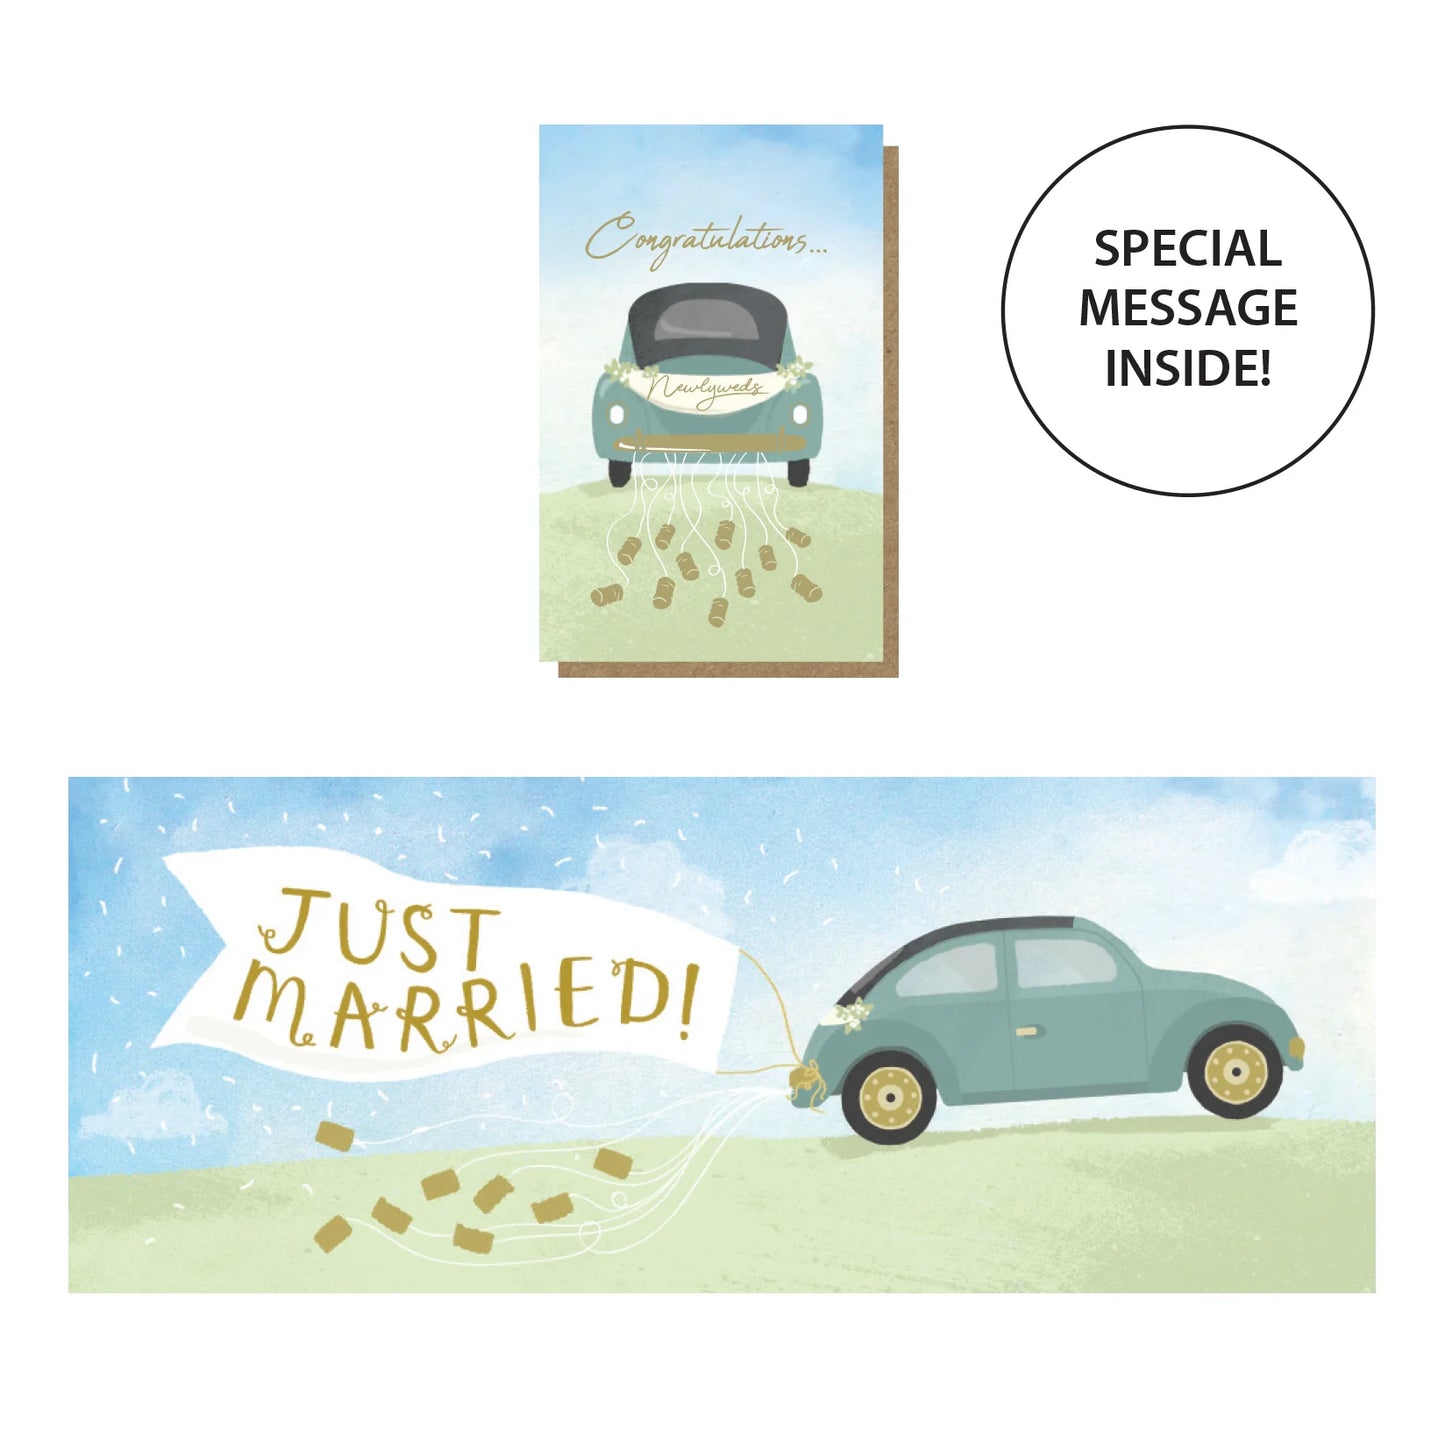 JUST MARRIED GREETING CARD